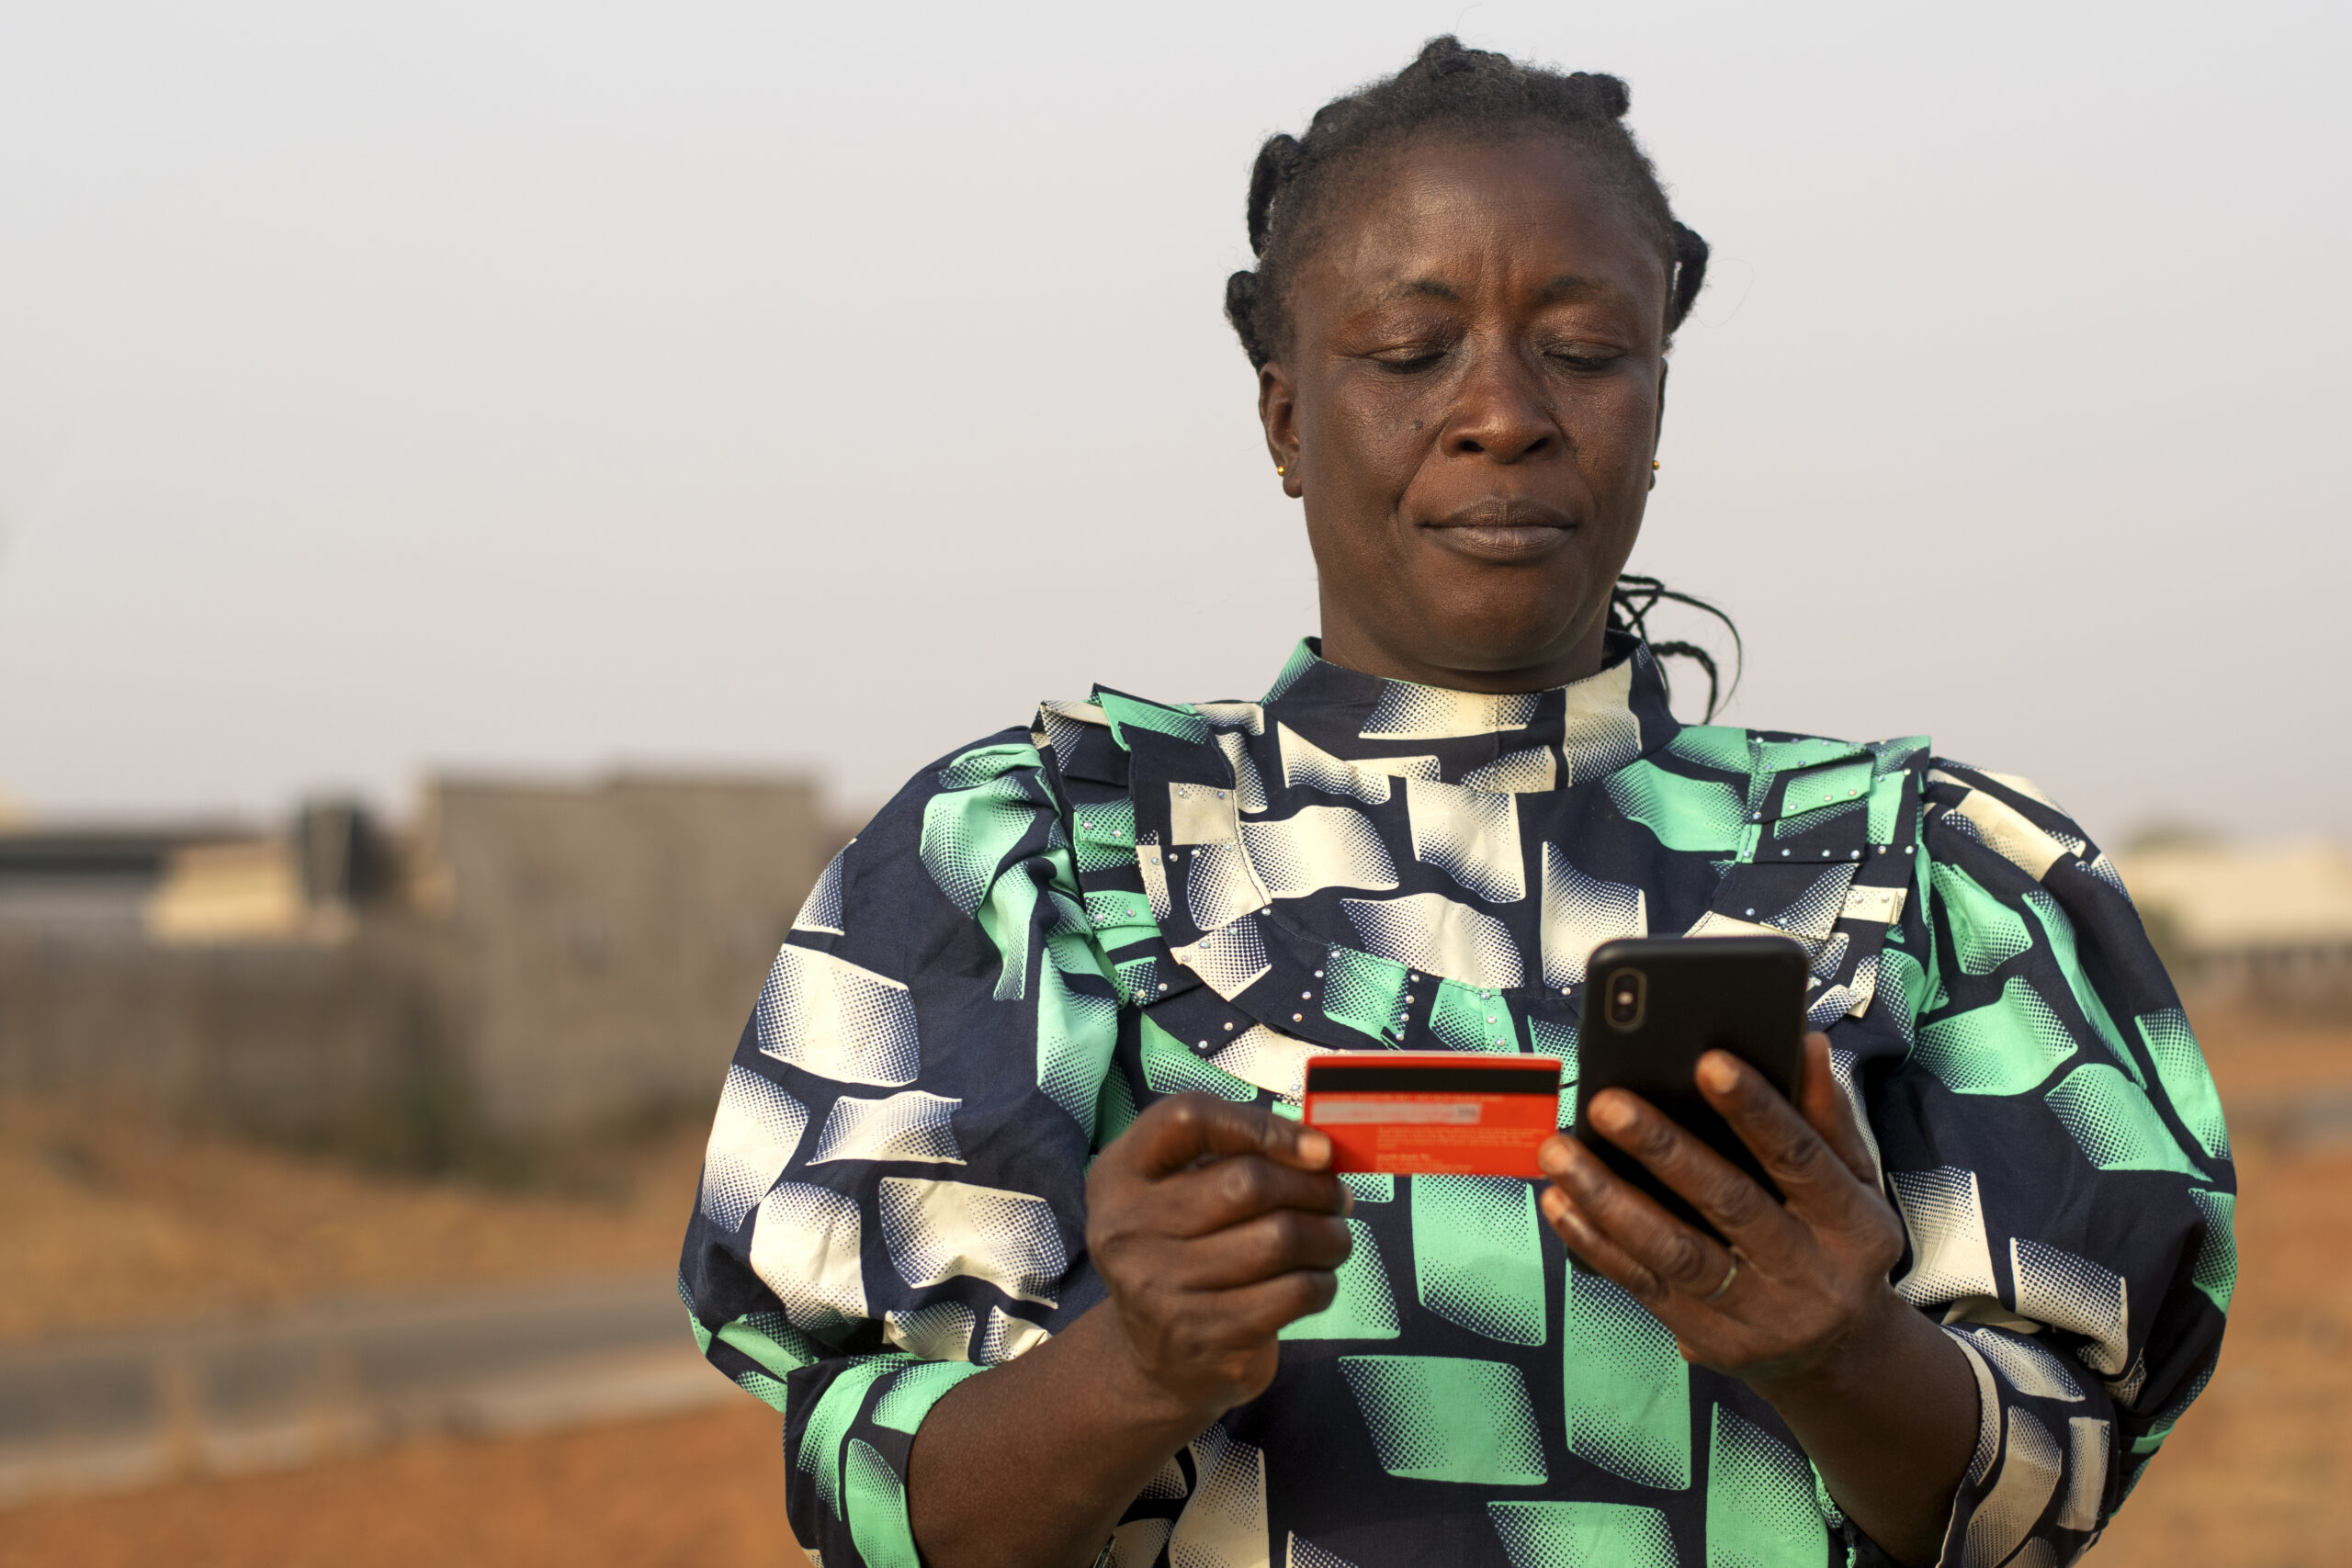 Technology is reshaping the ecommerce landscape in Africa